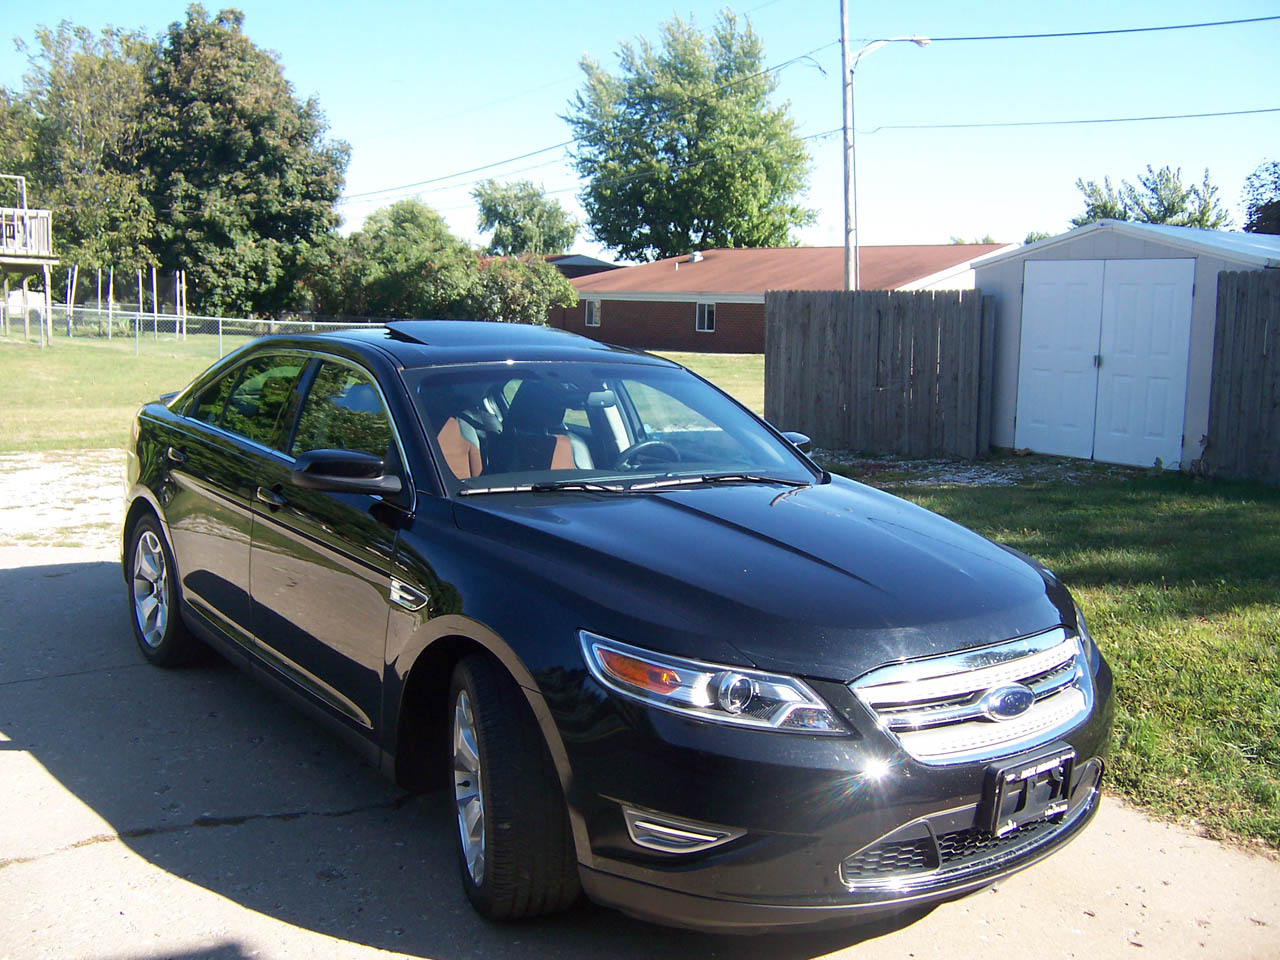 2010 Black Ford Taurus SHO picture, mods, upgrades